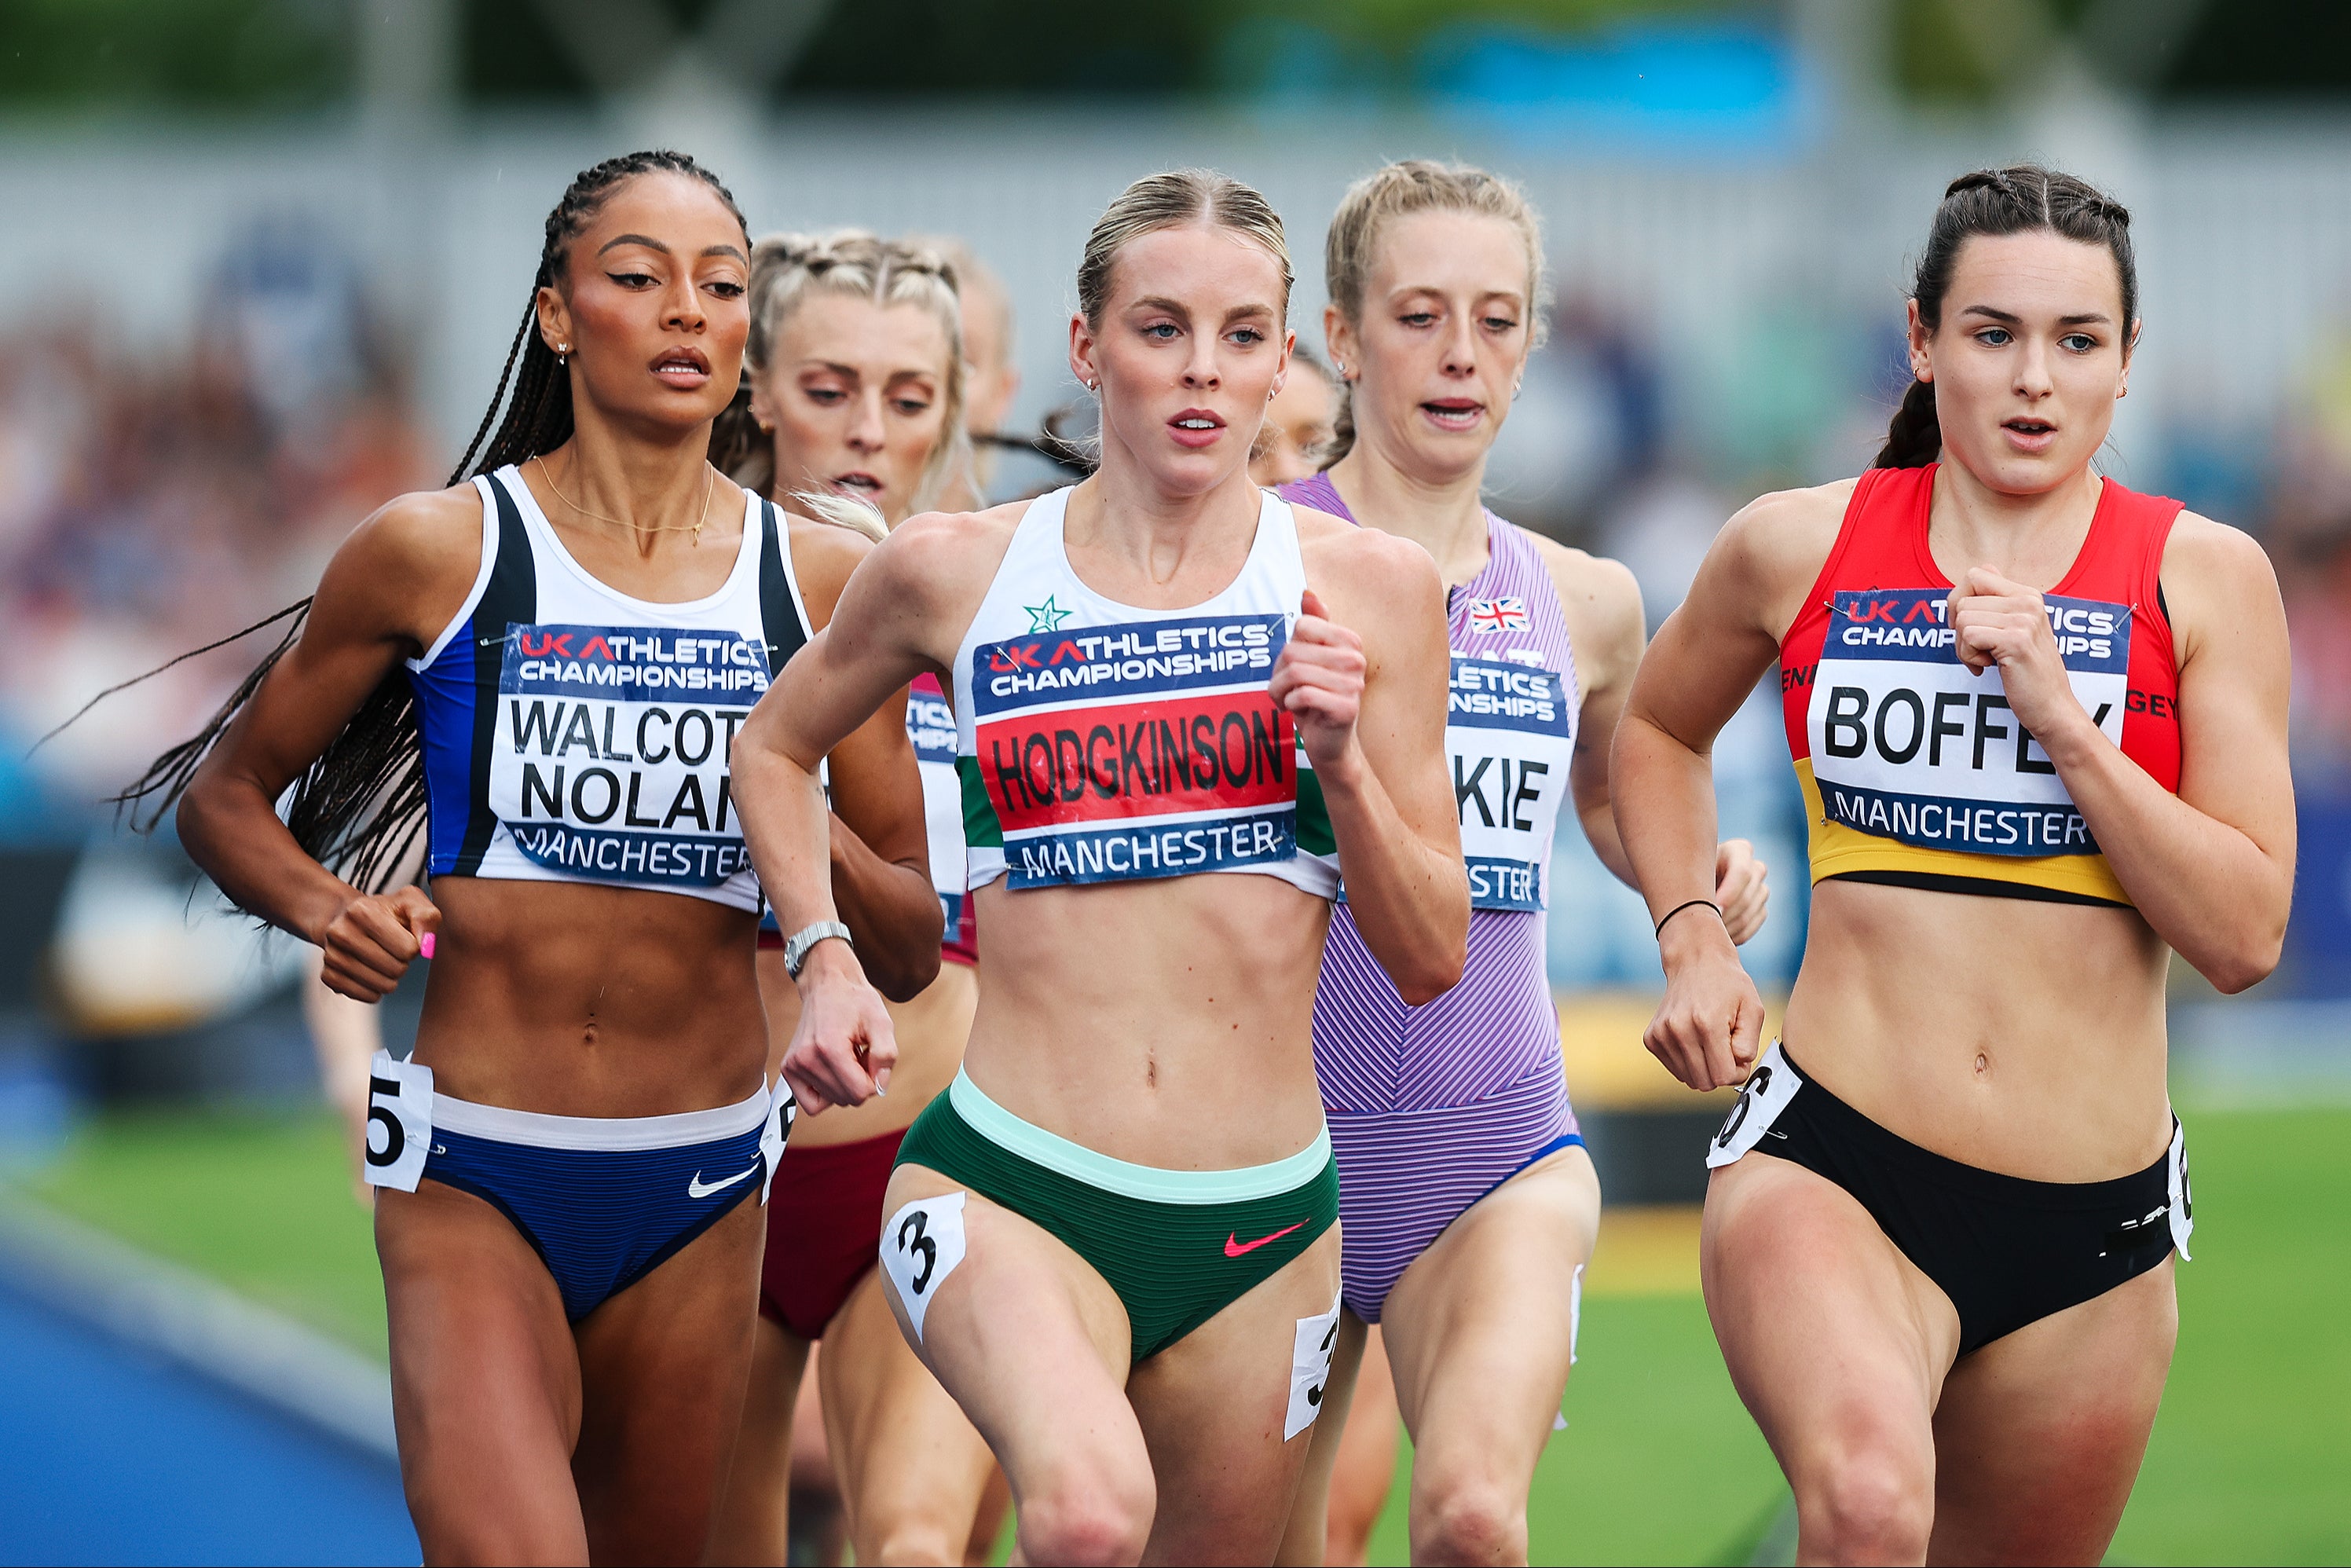 Keely Hodgkinson leads a strong crop of British middle-distance runners competing at the Olympic trials